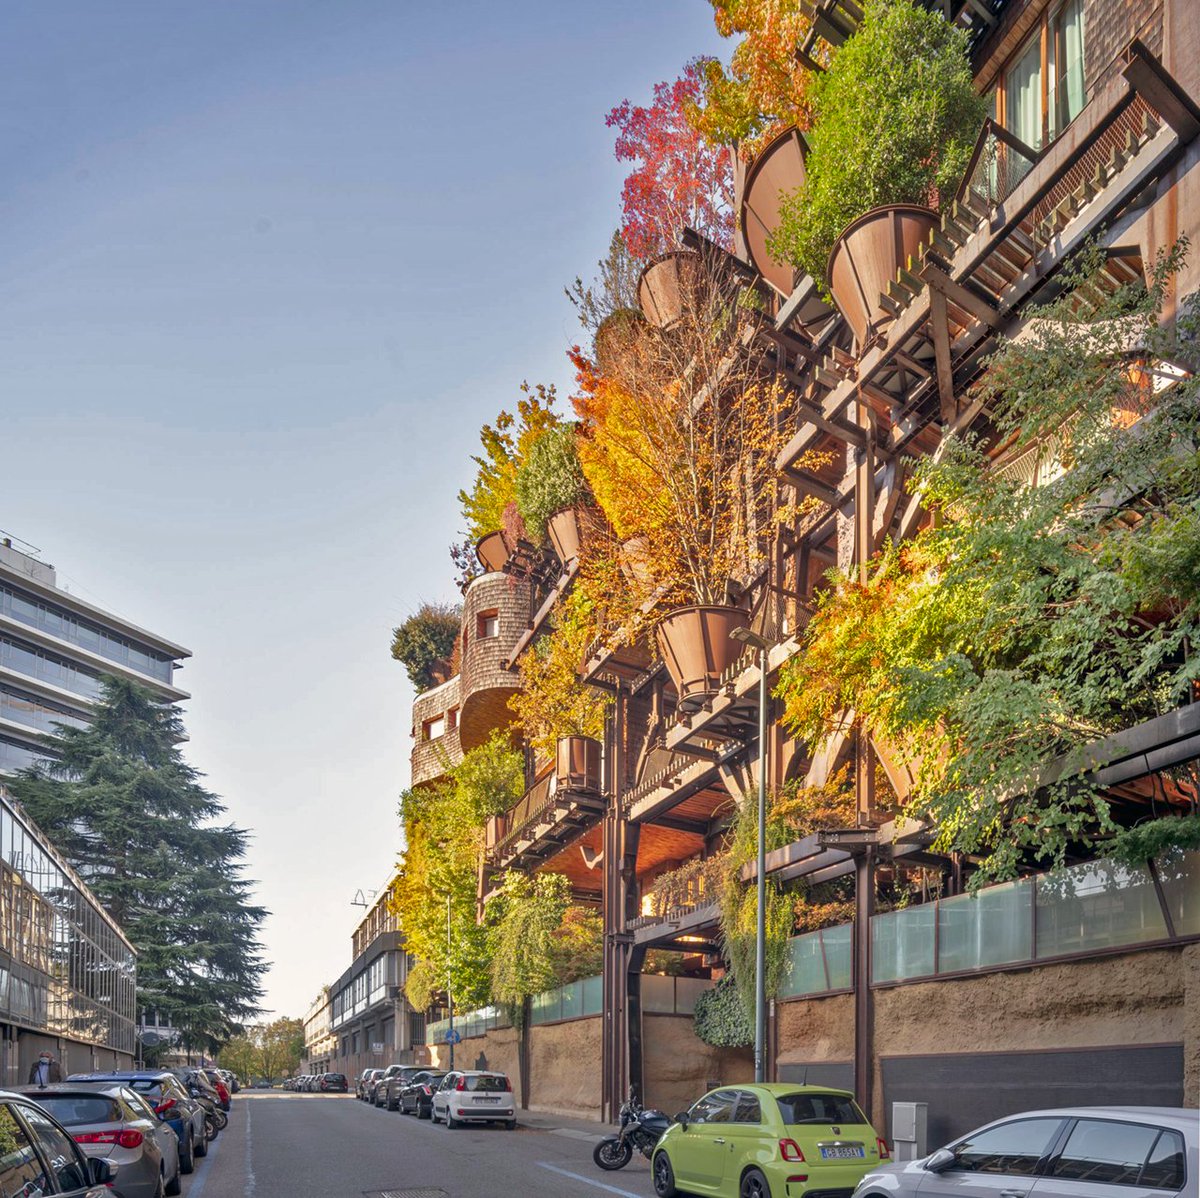 With 150 trees across 5 floors of terraces, balconies, & gardens, Turin condominium 25 Verde rises like a giant treehouse: a forest-building ecosystem combining geothermal, water reuse, & natural cooling for 63 units. Watch the video by @kirstendirksen faircompanies.com/videos/forest-…